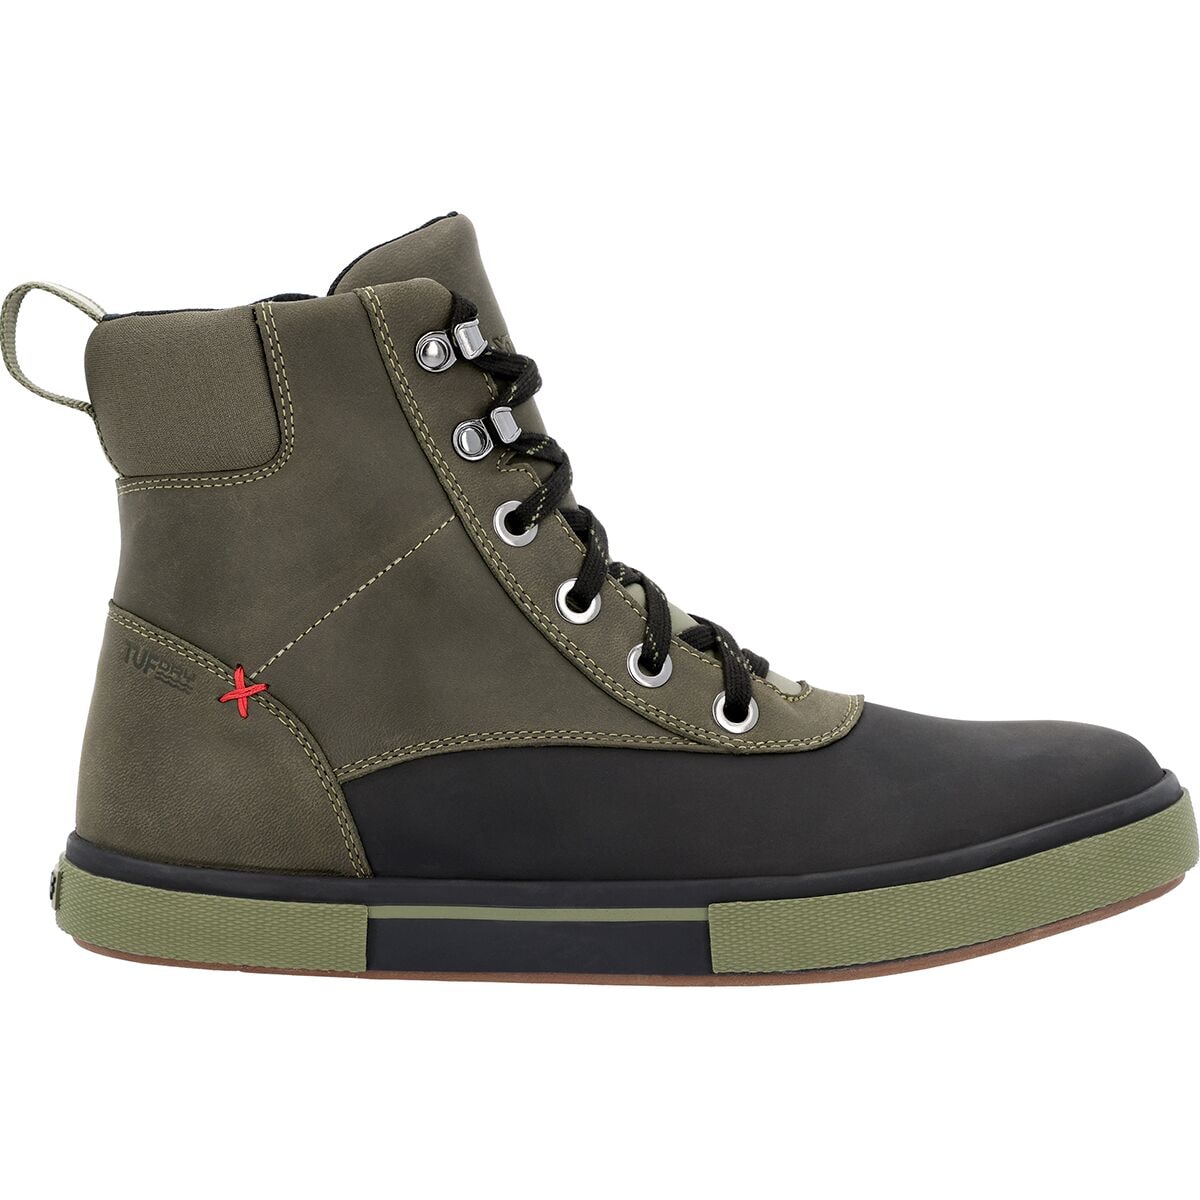 Ankle 6in Lace Leather Deck Boot - Men